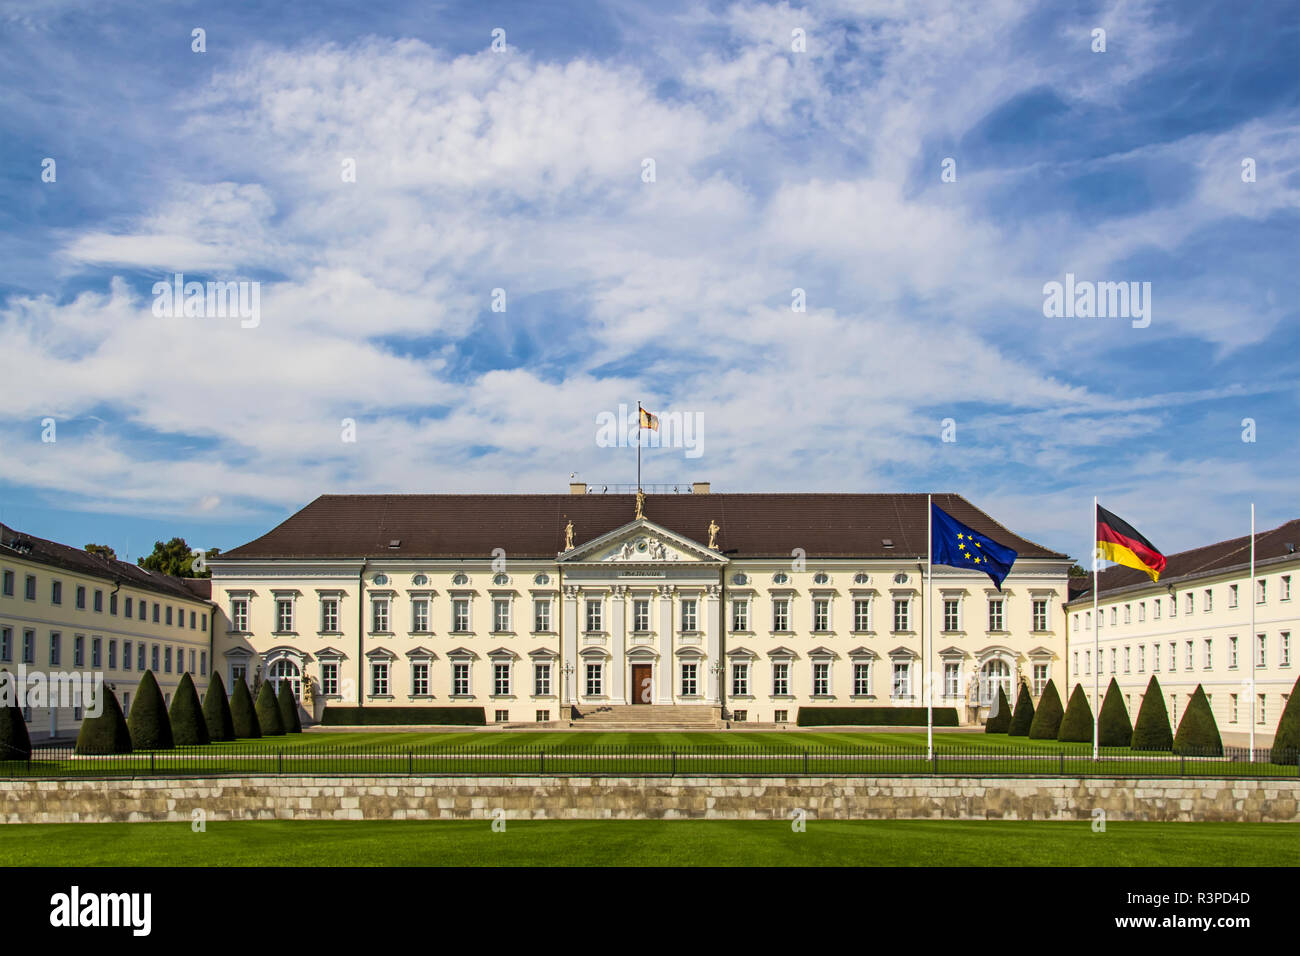 Berlin, Germany. Facade of Bellevue Palace, the traditional residence and offices of the President of the Federal Republic of Germany Stock Photo